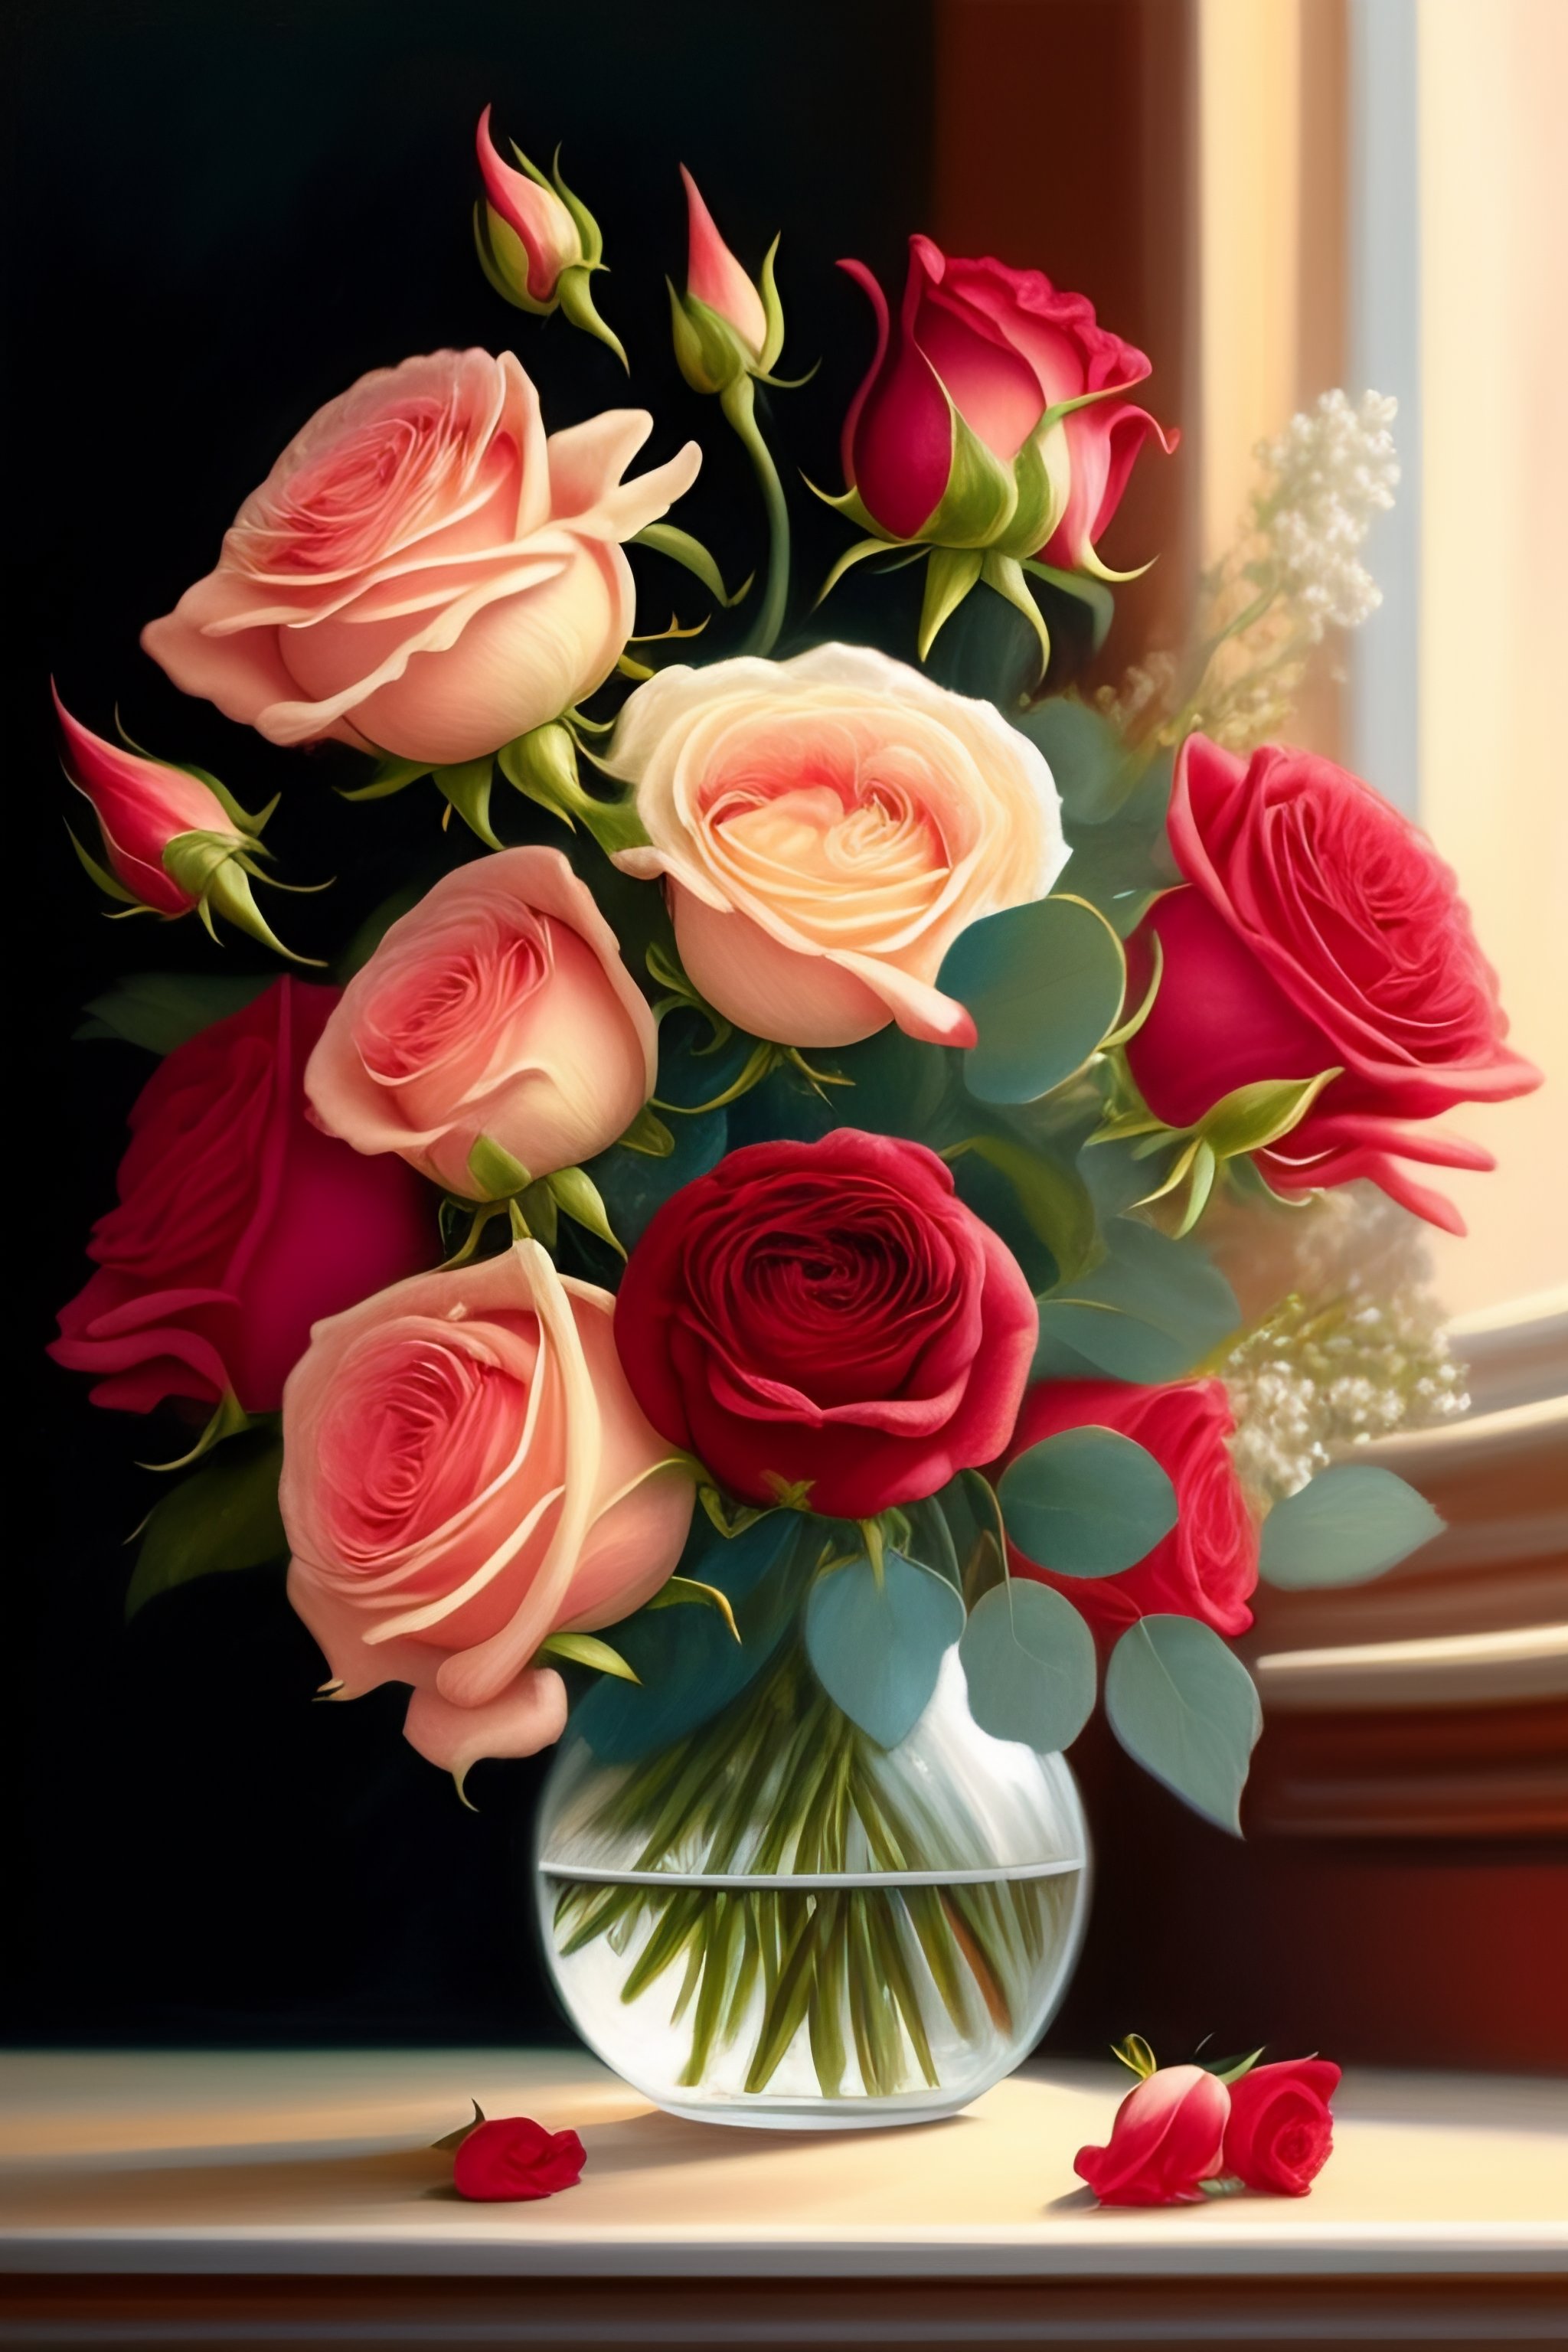 Lexica - Rose bouquet, beautiful, painting, wedding bouquet, many flowers